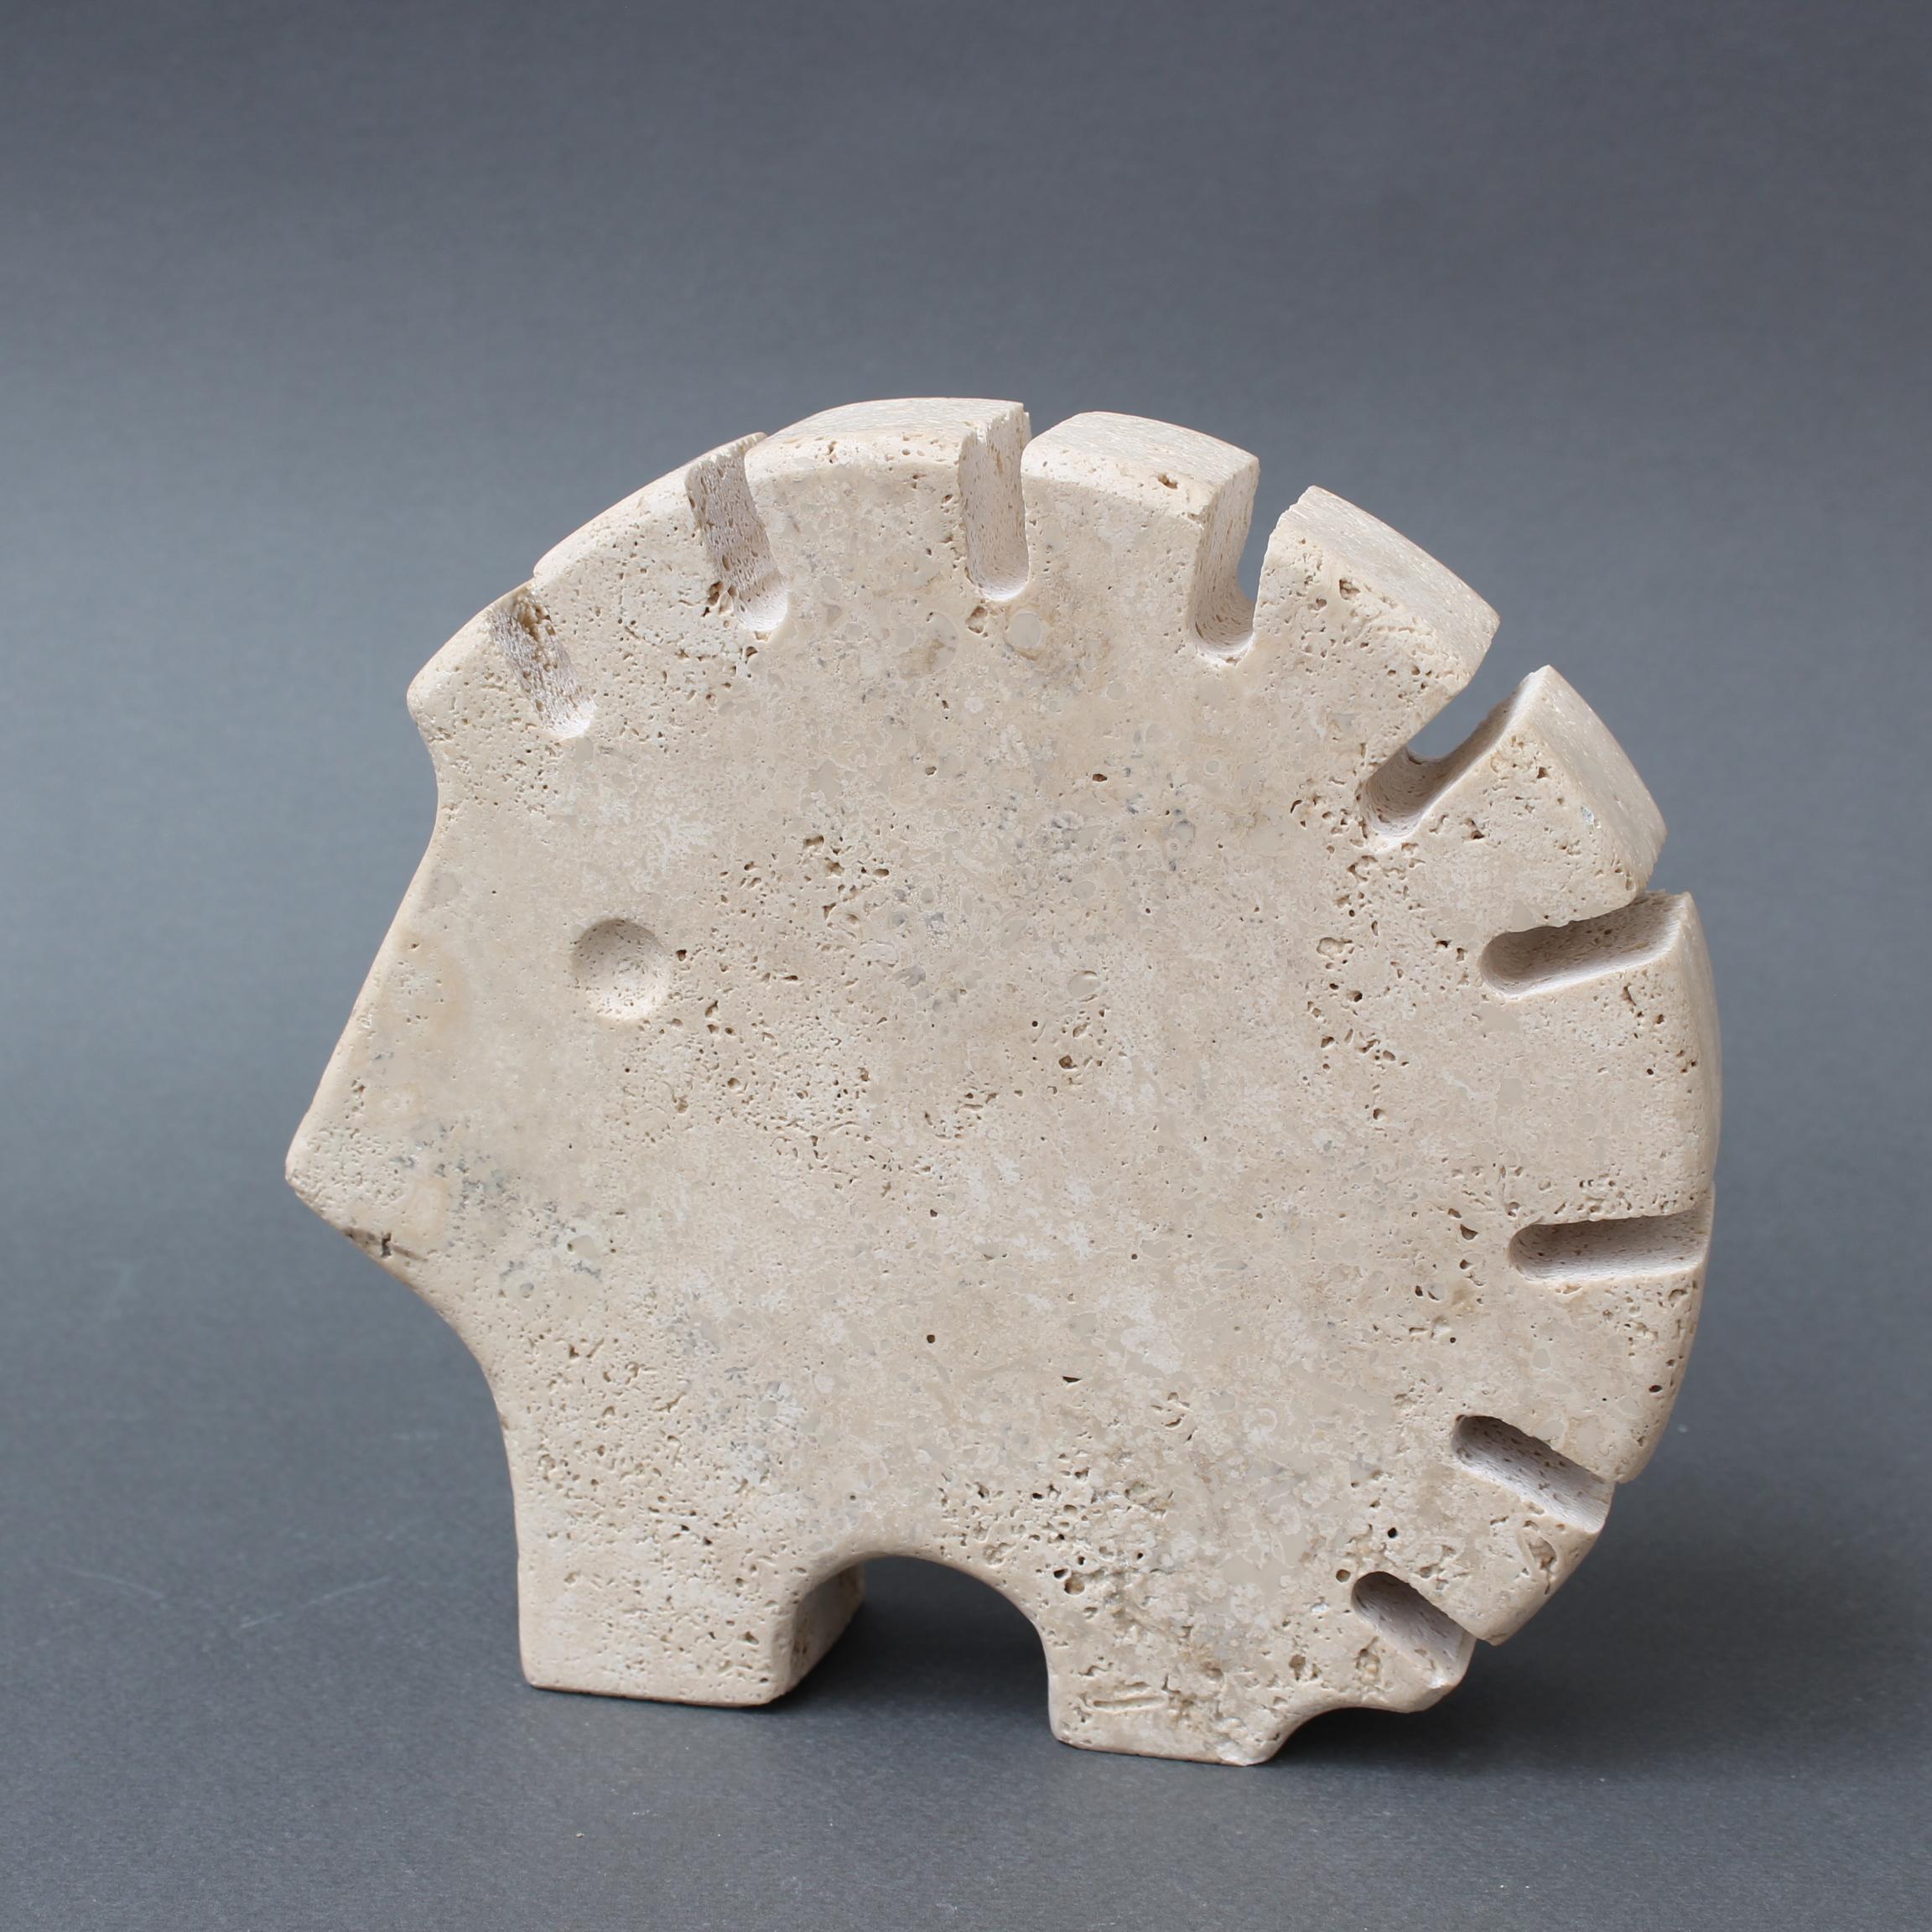 Vintage Italian travertine porcupine sculpture and card or letter holder by Mannelli Bros (circa 1970s). Designed by Italian brothers, Fratelli Mannelli, this charming piece has loads of character and will delight collectors and those who love